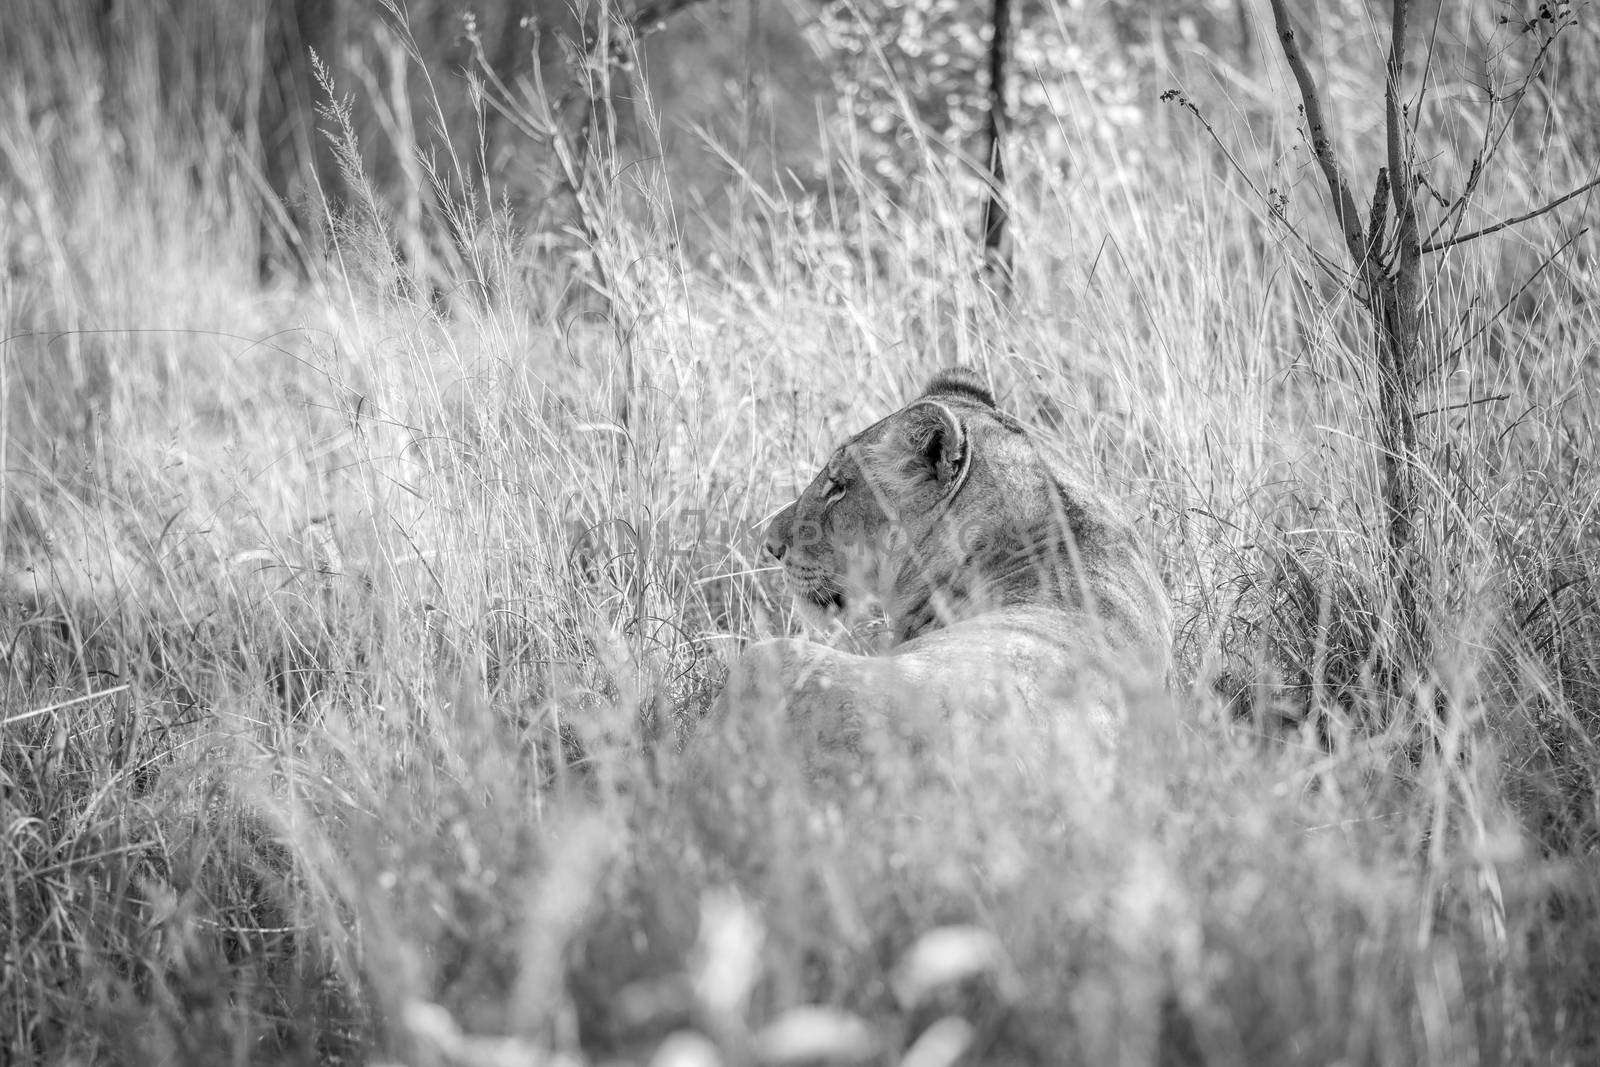 Lioness laying in the grass in black and white in the Welgevonden game reserve, South Africa.